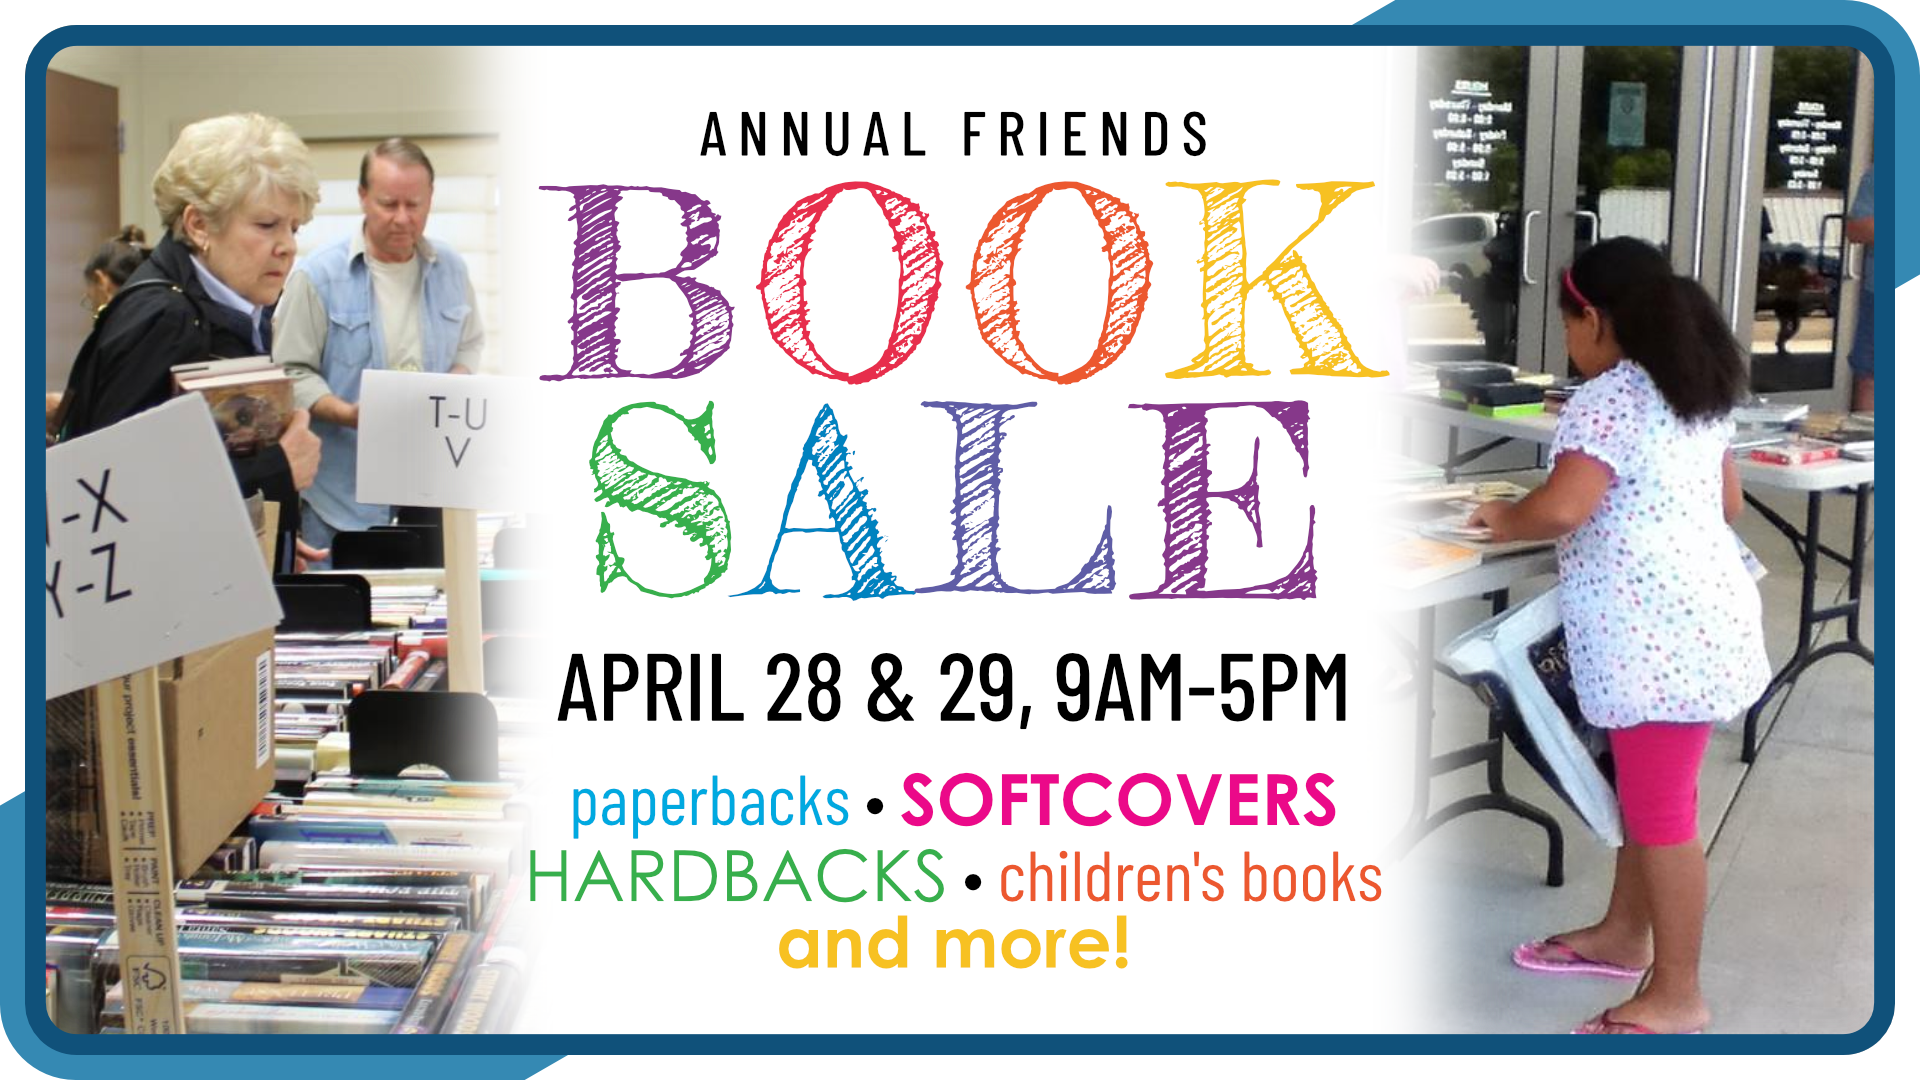 Annual Friends Book Sale, April 28th and 29th from 9am to 5pm, intended for all ages